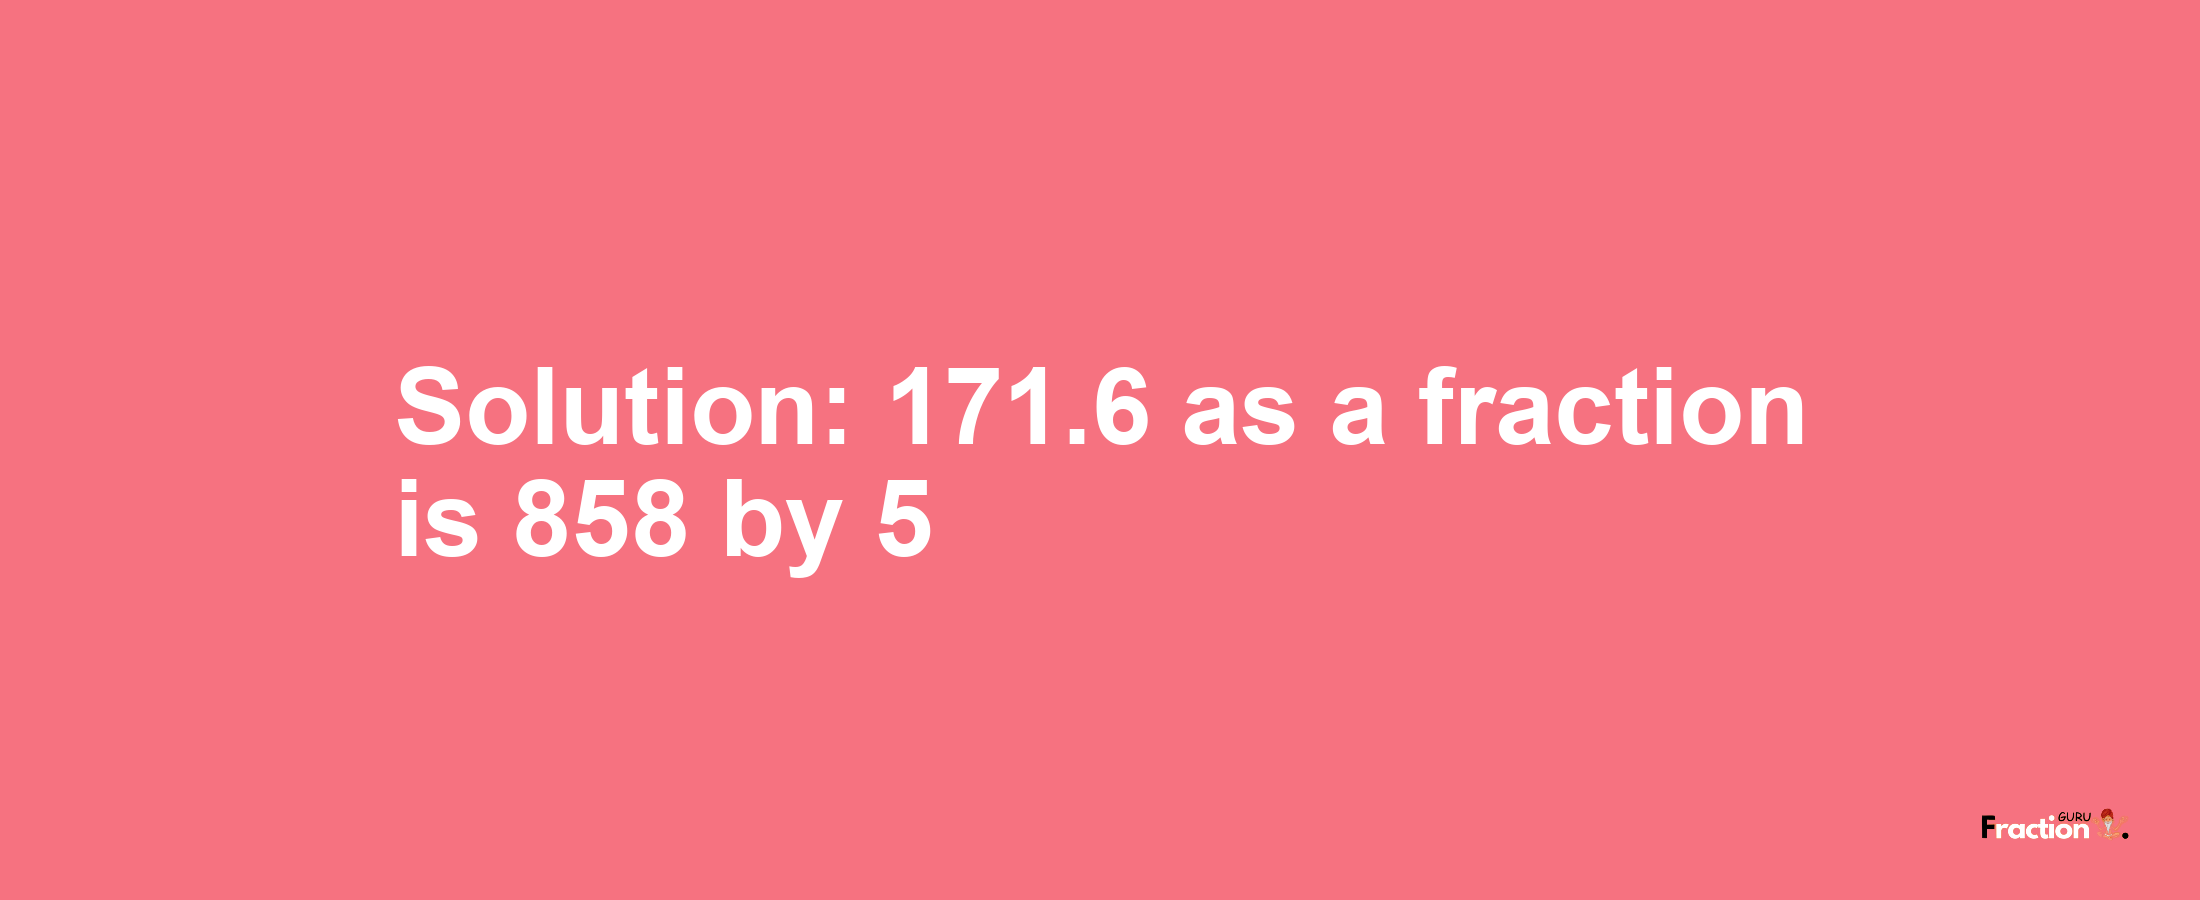 Solution:171.6 as a fraction is 858/5